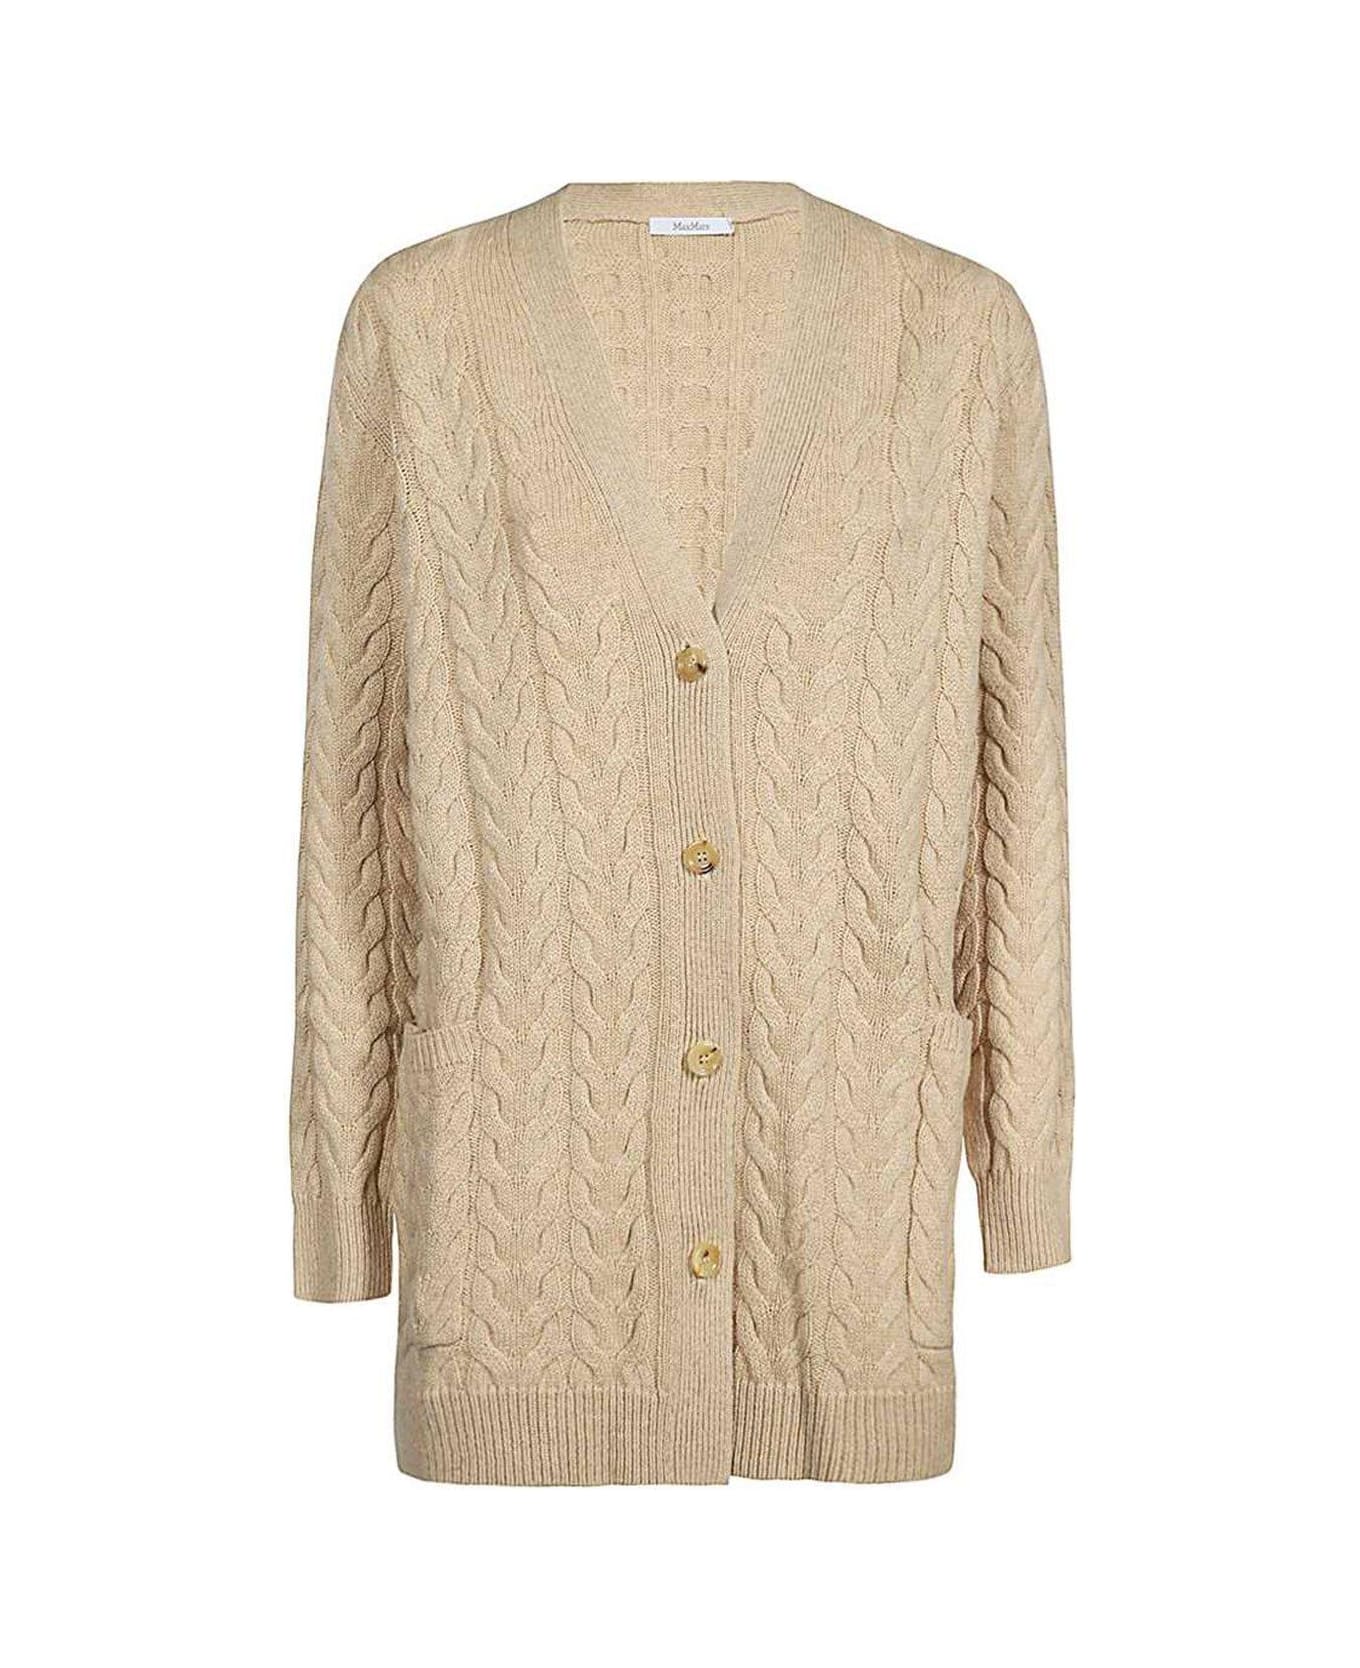 Max Mara Buttoned Long-sleeved Knitted Cardigan カーディガン